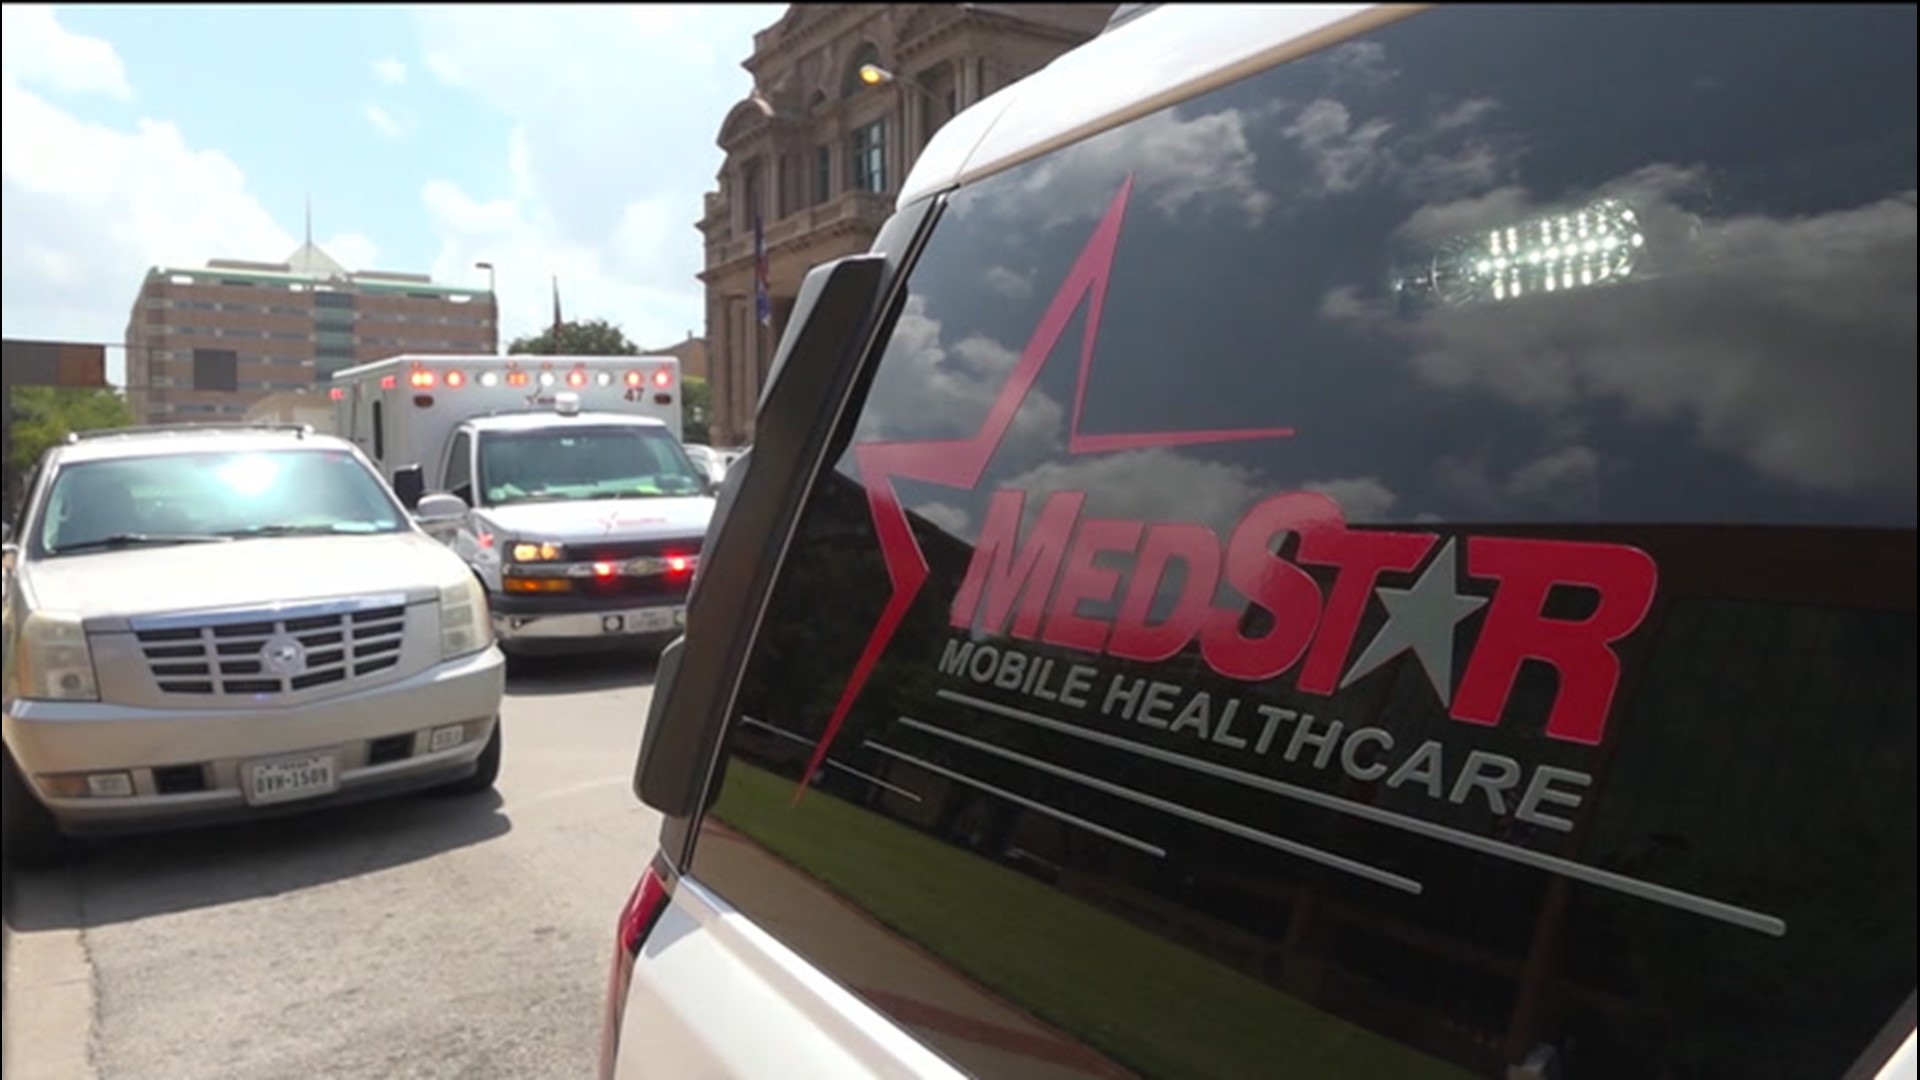 AccuWeather's Bill Wadell follows along with paramedics in Fort Worth, Texas, responding to heat exhaustion calls as temperatures climb into the triple digits.